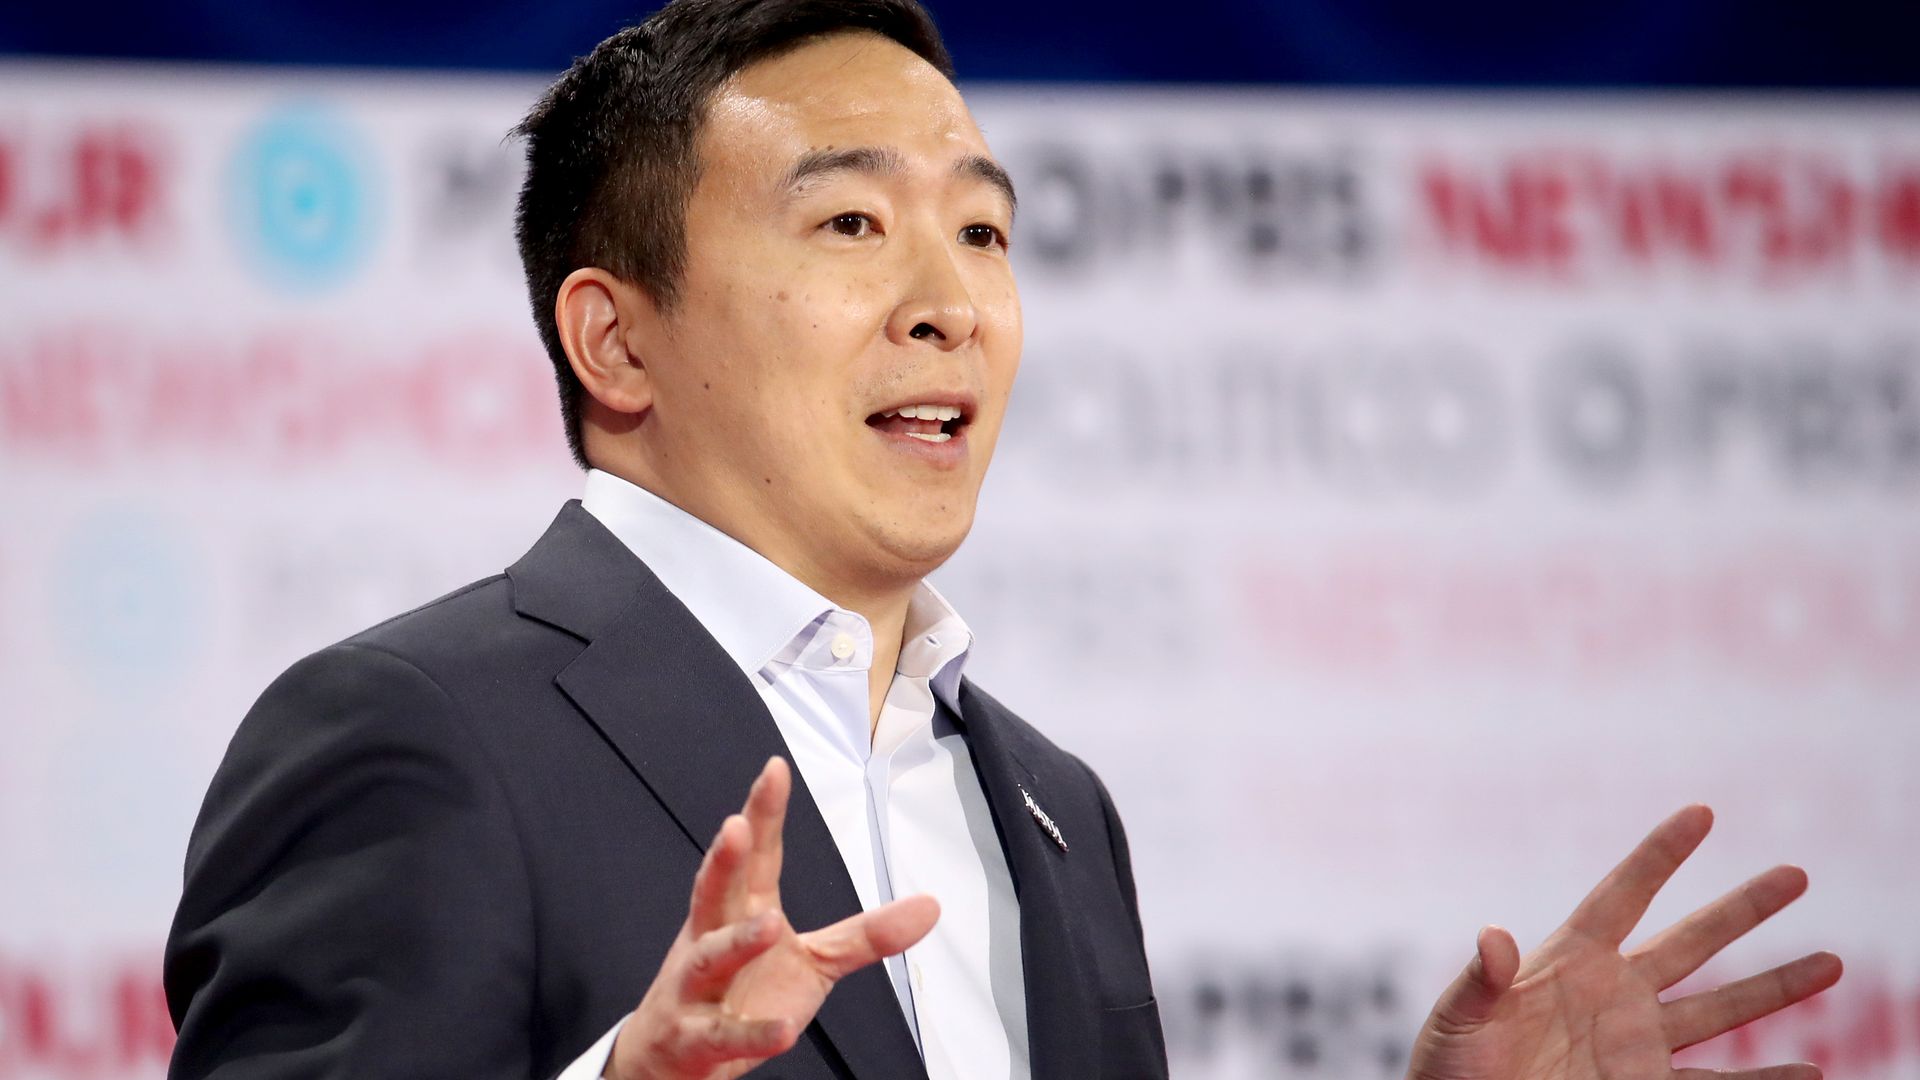 Andrew Yang speaks at a podium during a debate.